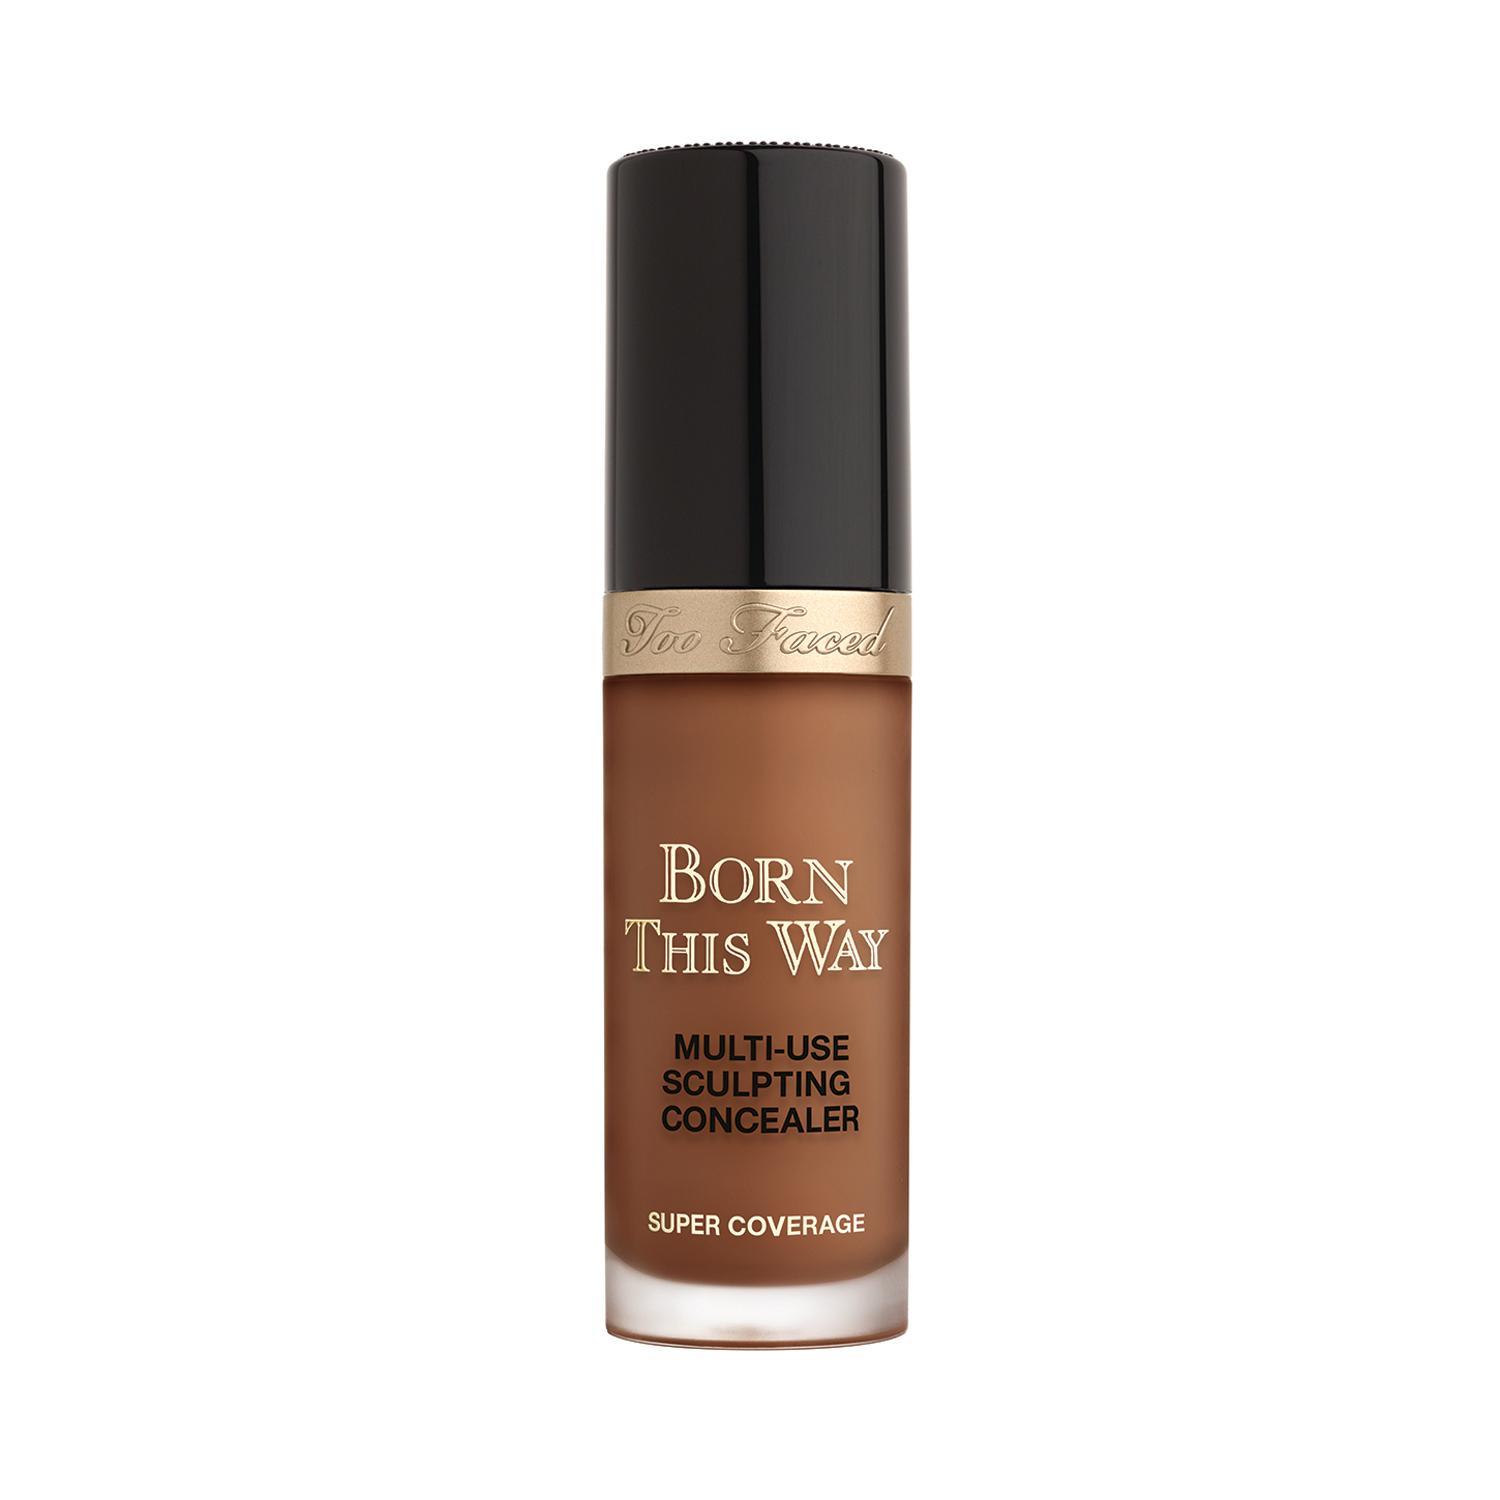 too-faced-born-this-way-super-coverage-multi-use-sculpting-concealer---cocoa-(13.5ml)